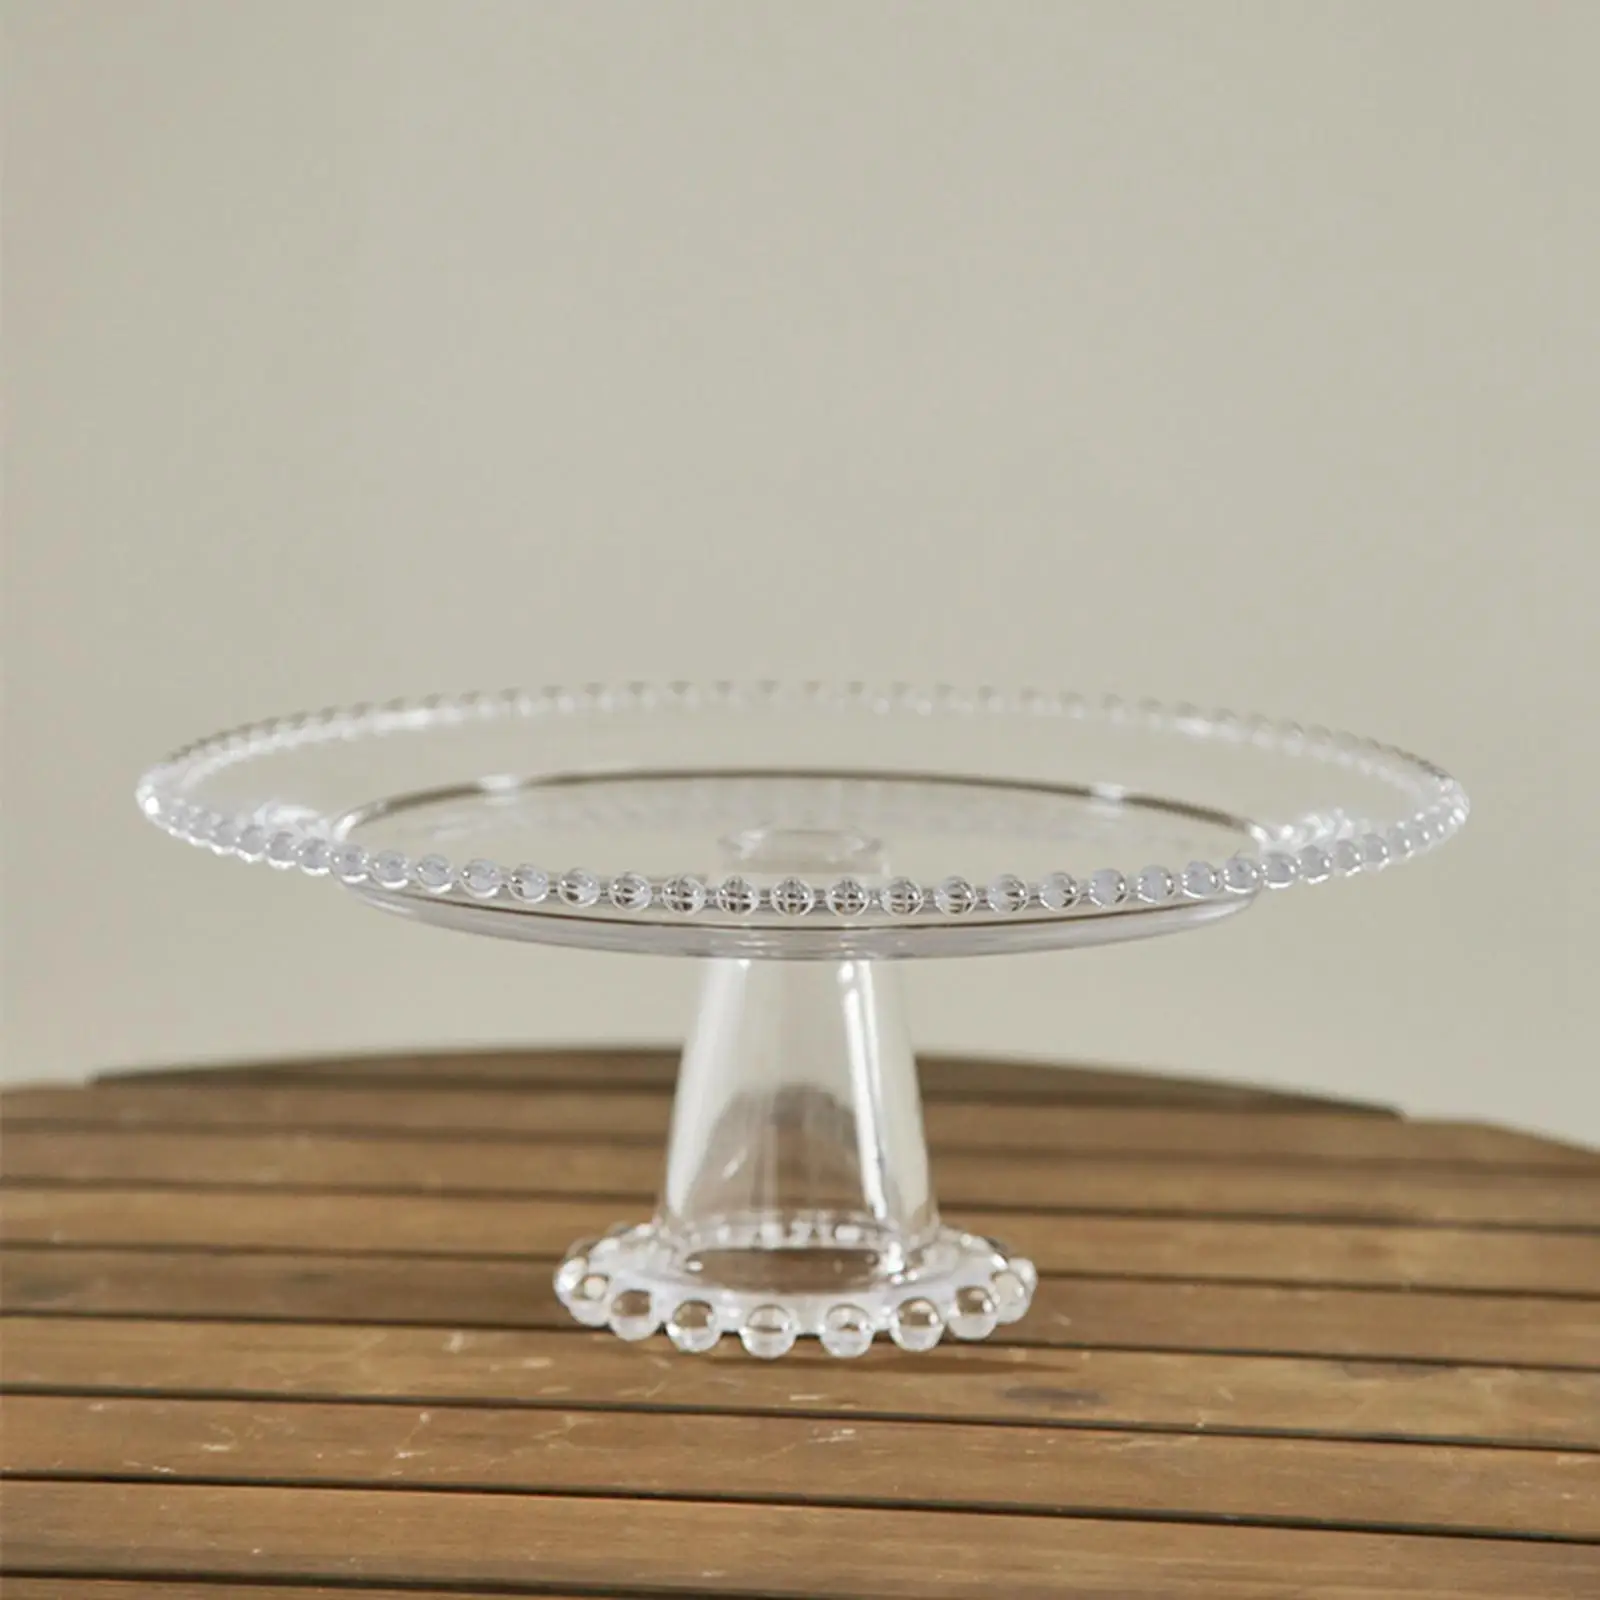 Clear Cake Stand Cupcake Stands Cake Holder Round 12inch for Table Centerpiece Anniversaries Christmas Birthday Party Wedding